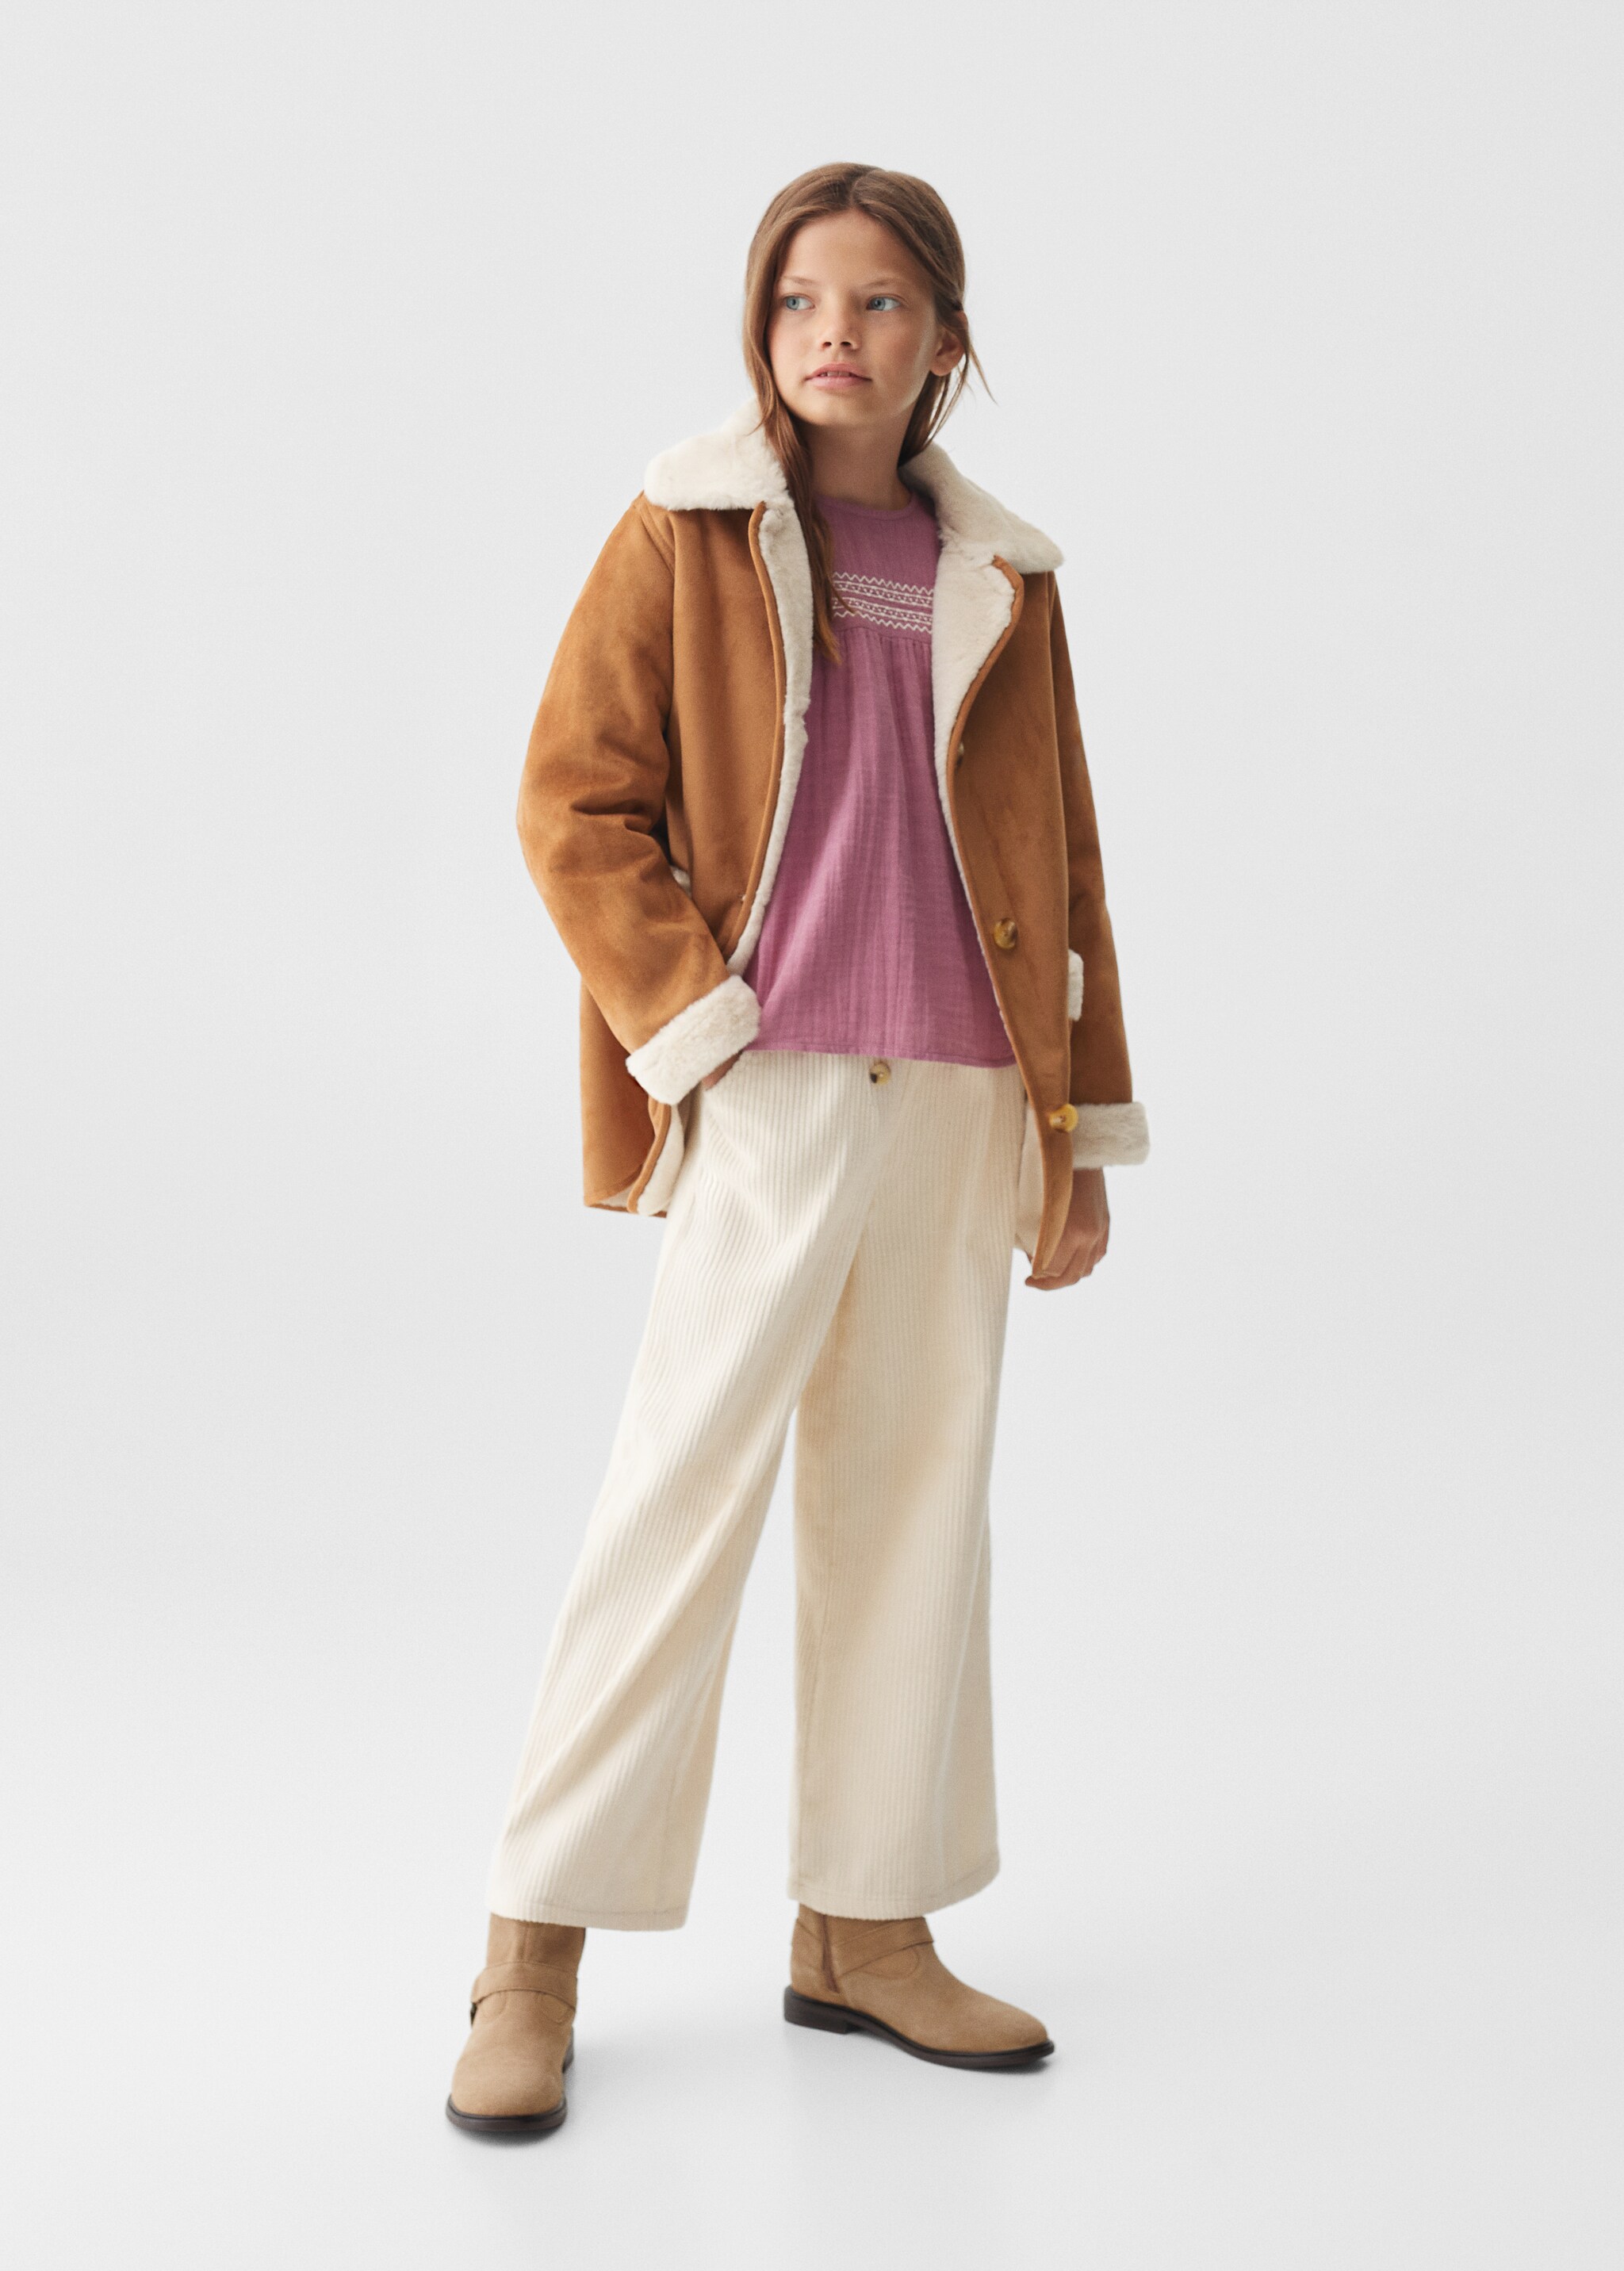 Faux shearling-lined coat - General plane